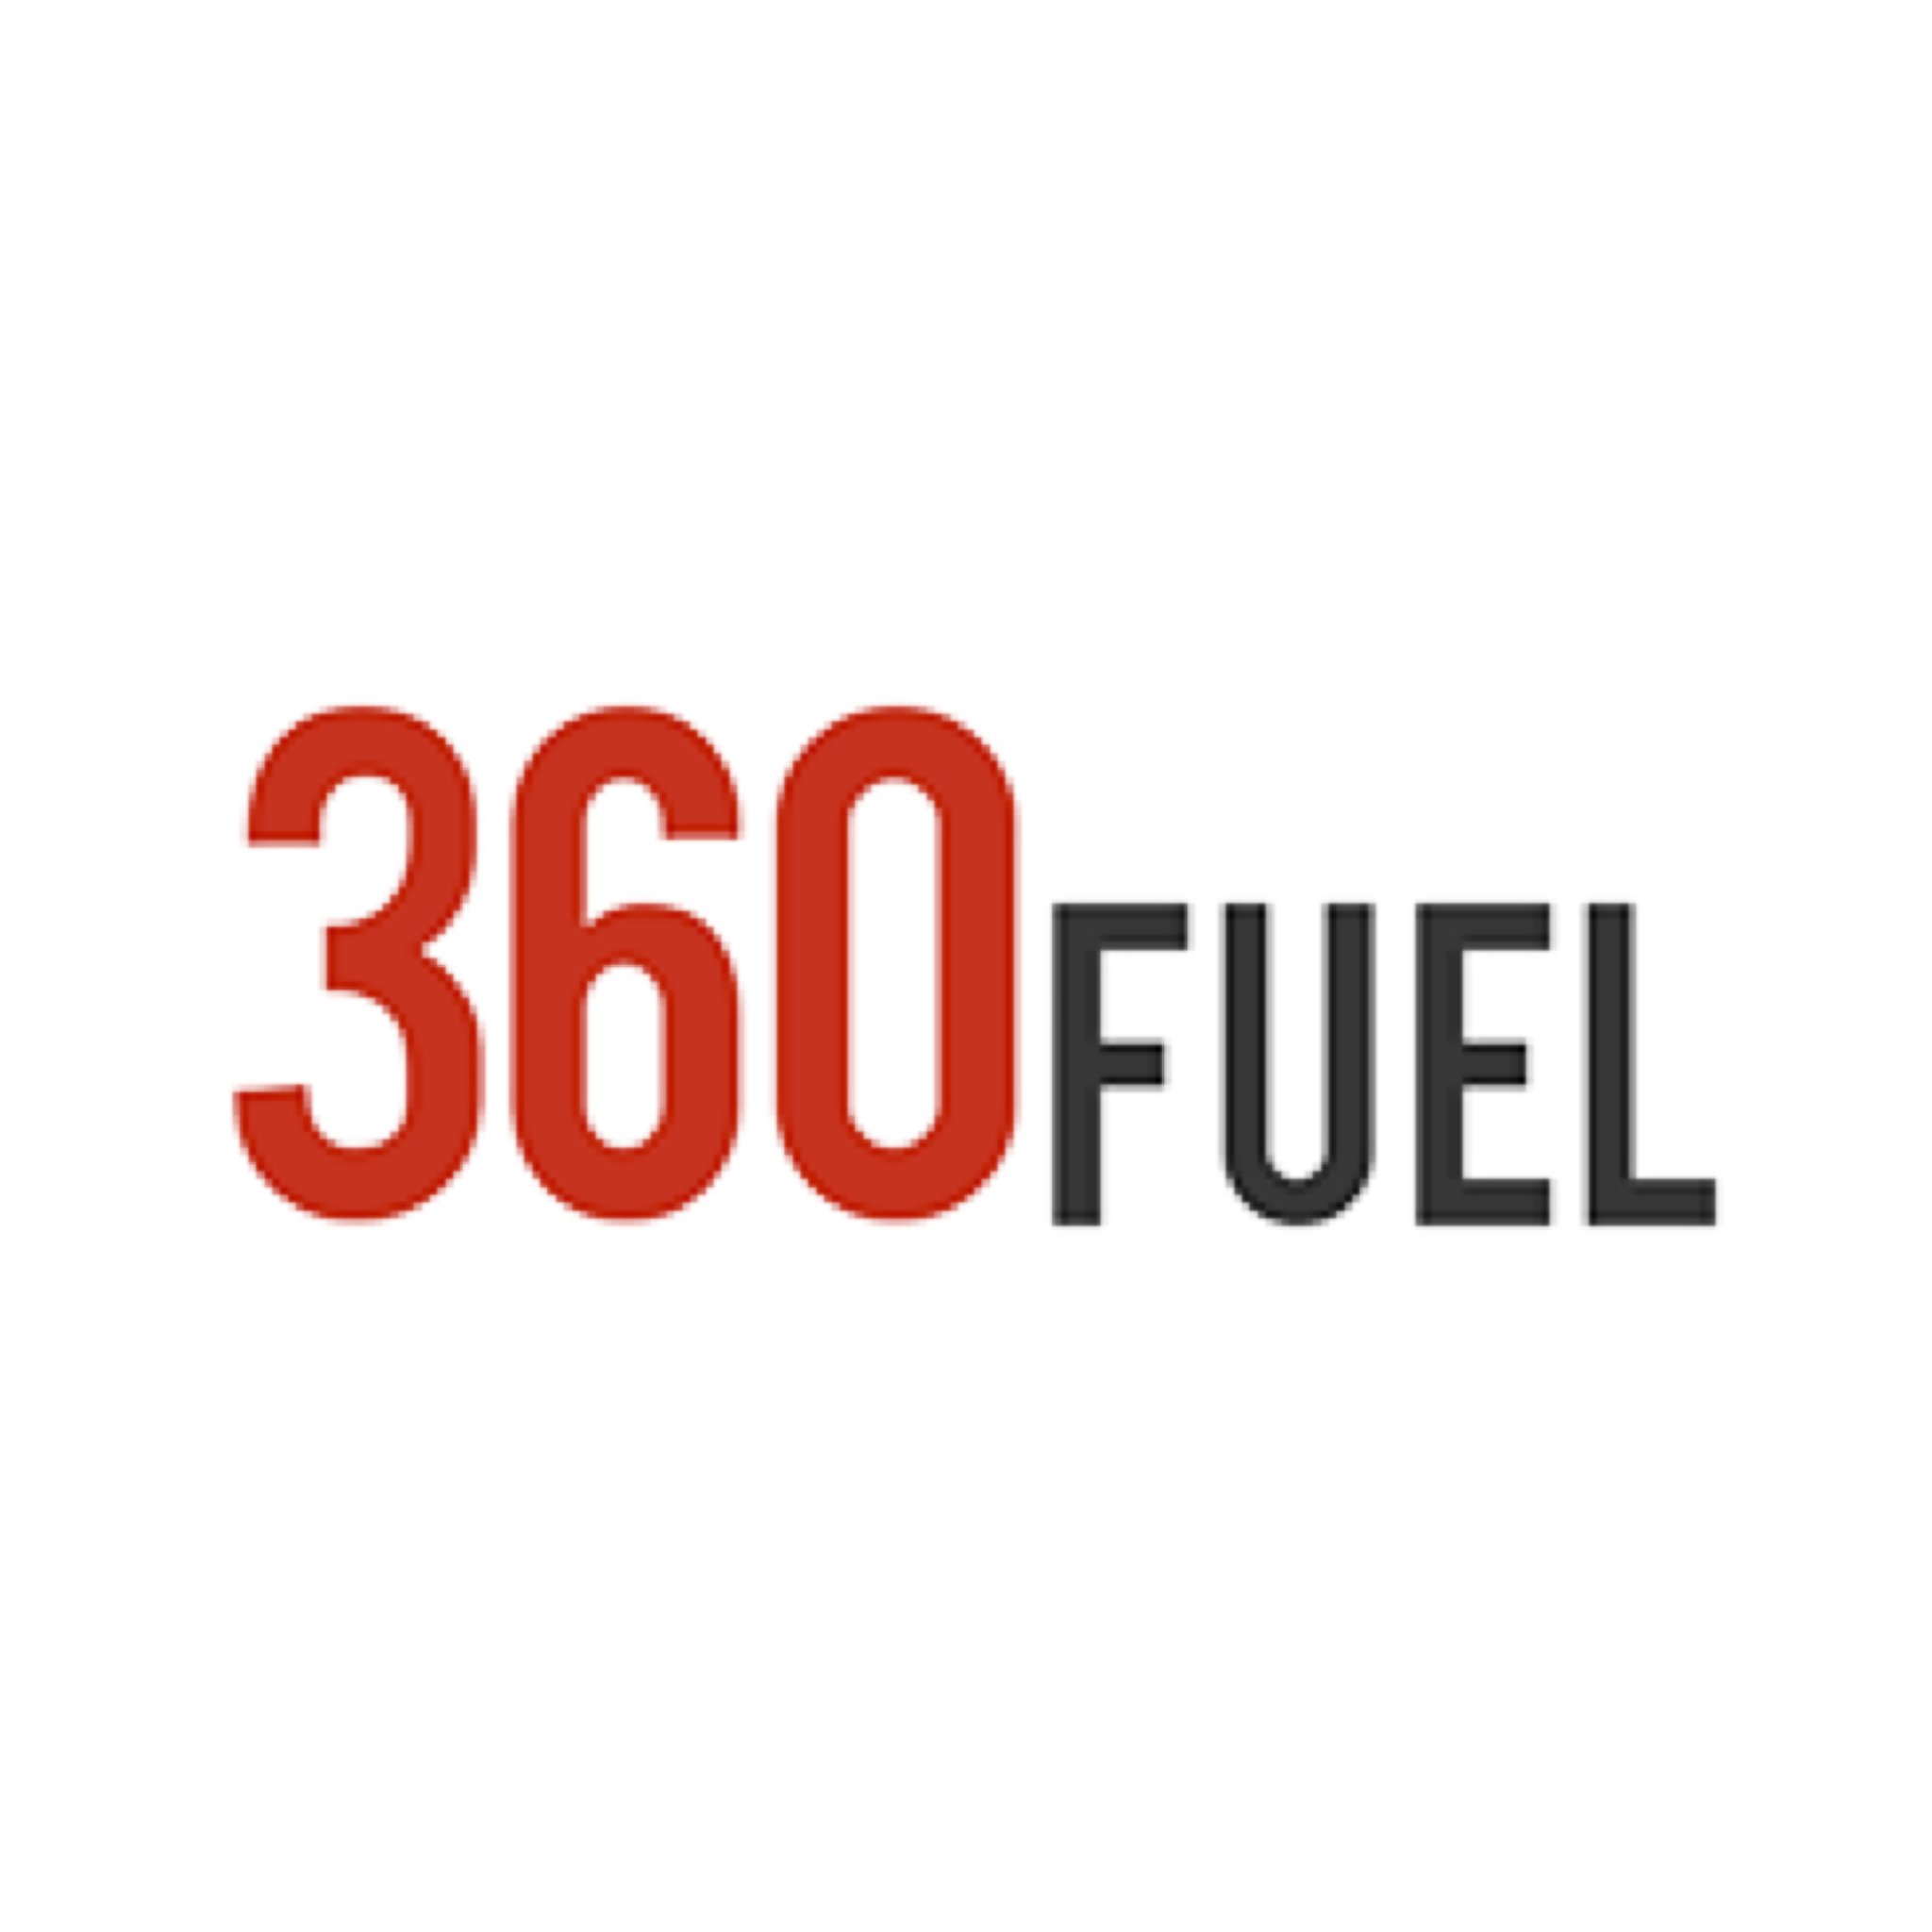 360Fuel is an Internet of Things (#IoT) company delivering connected fueling and C-Store retail.